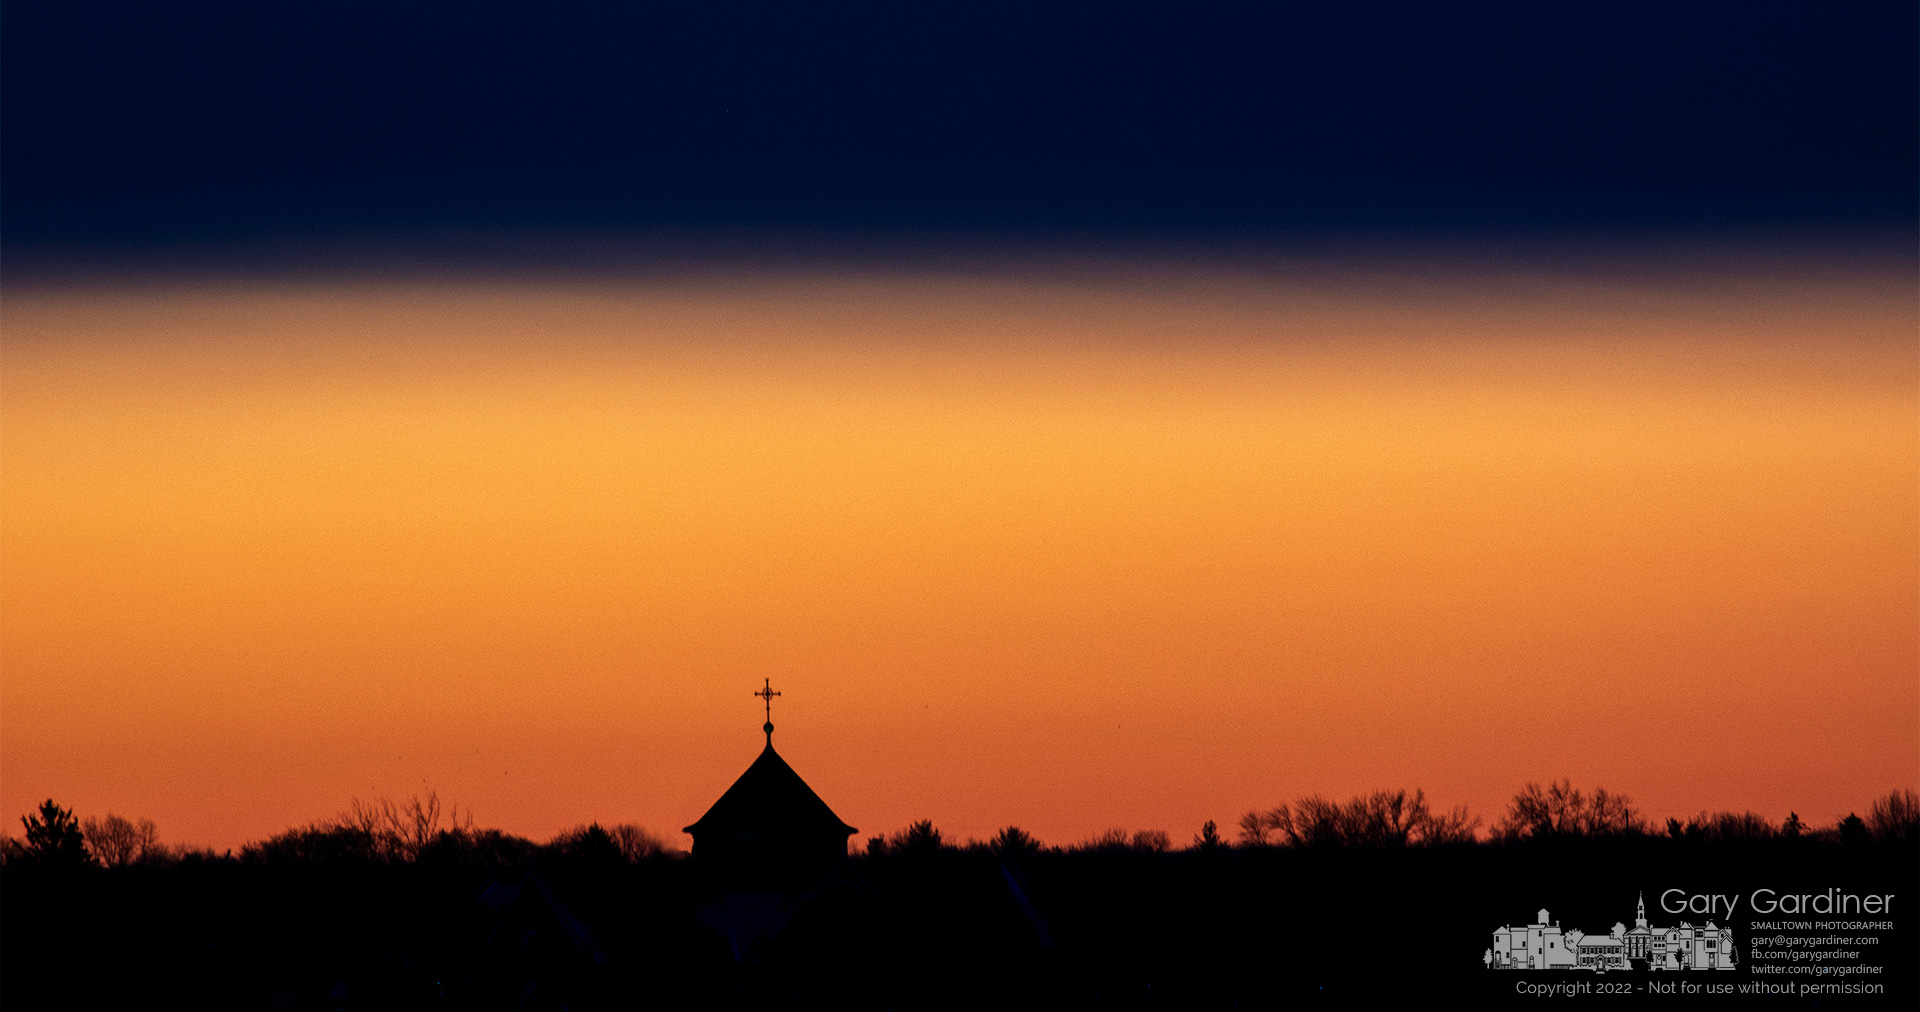 The steeple at St. Paul the Apostle Catholic Church stands above the treeline as the first light of day brightens the horizon minutes before sunrise. My Final Photo for March 13, 2022.